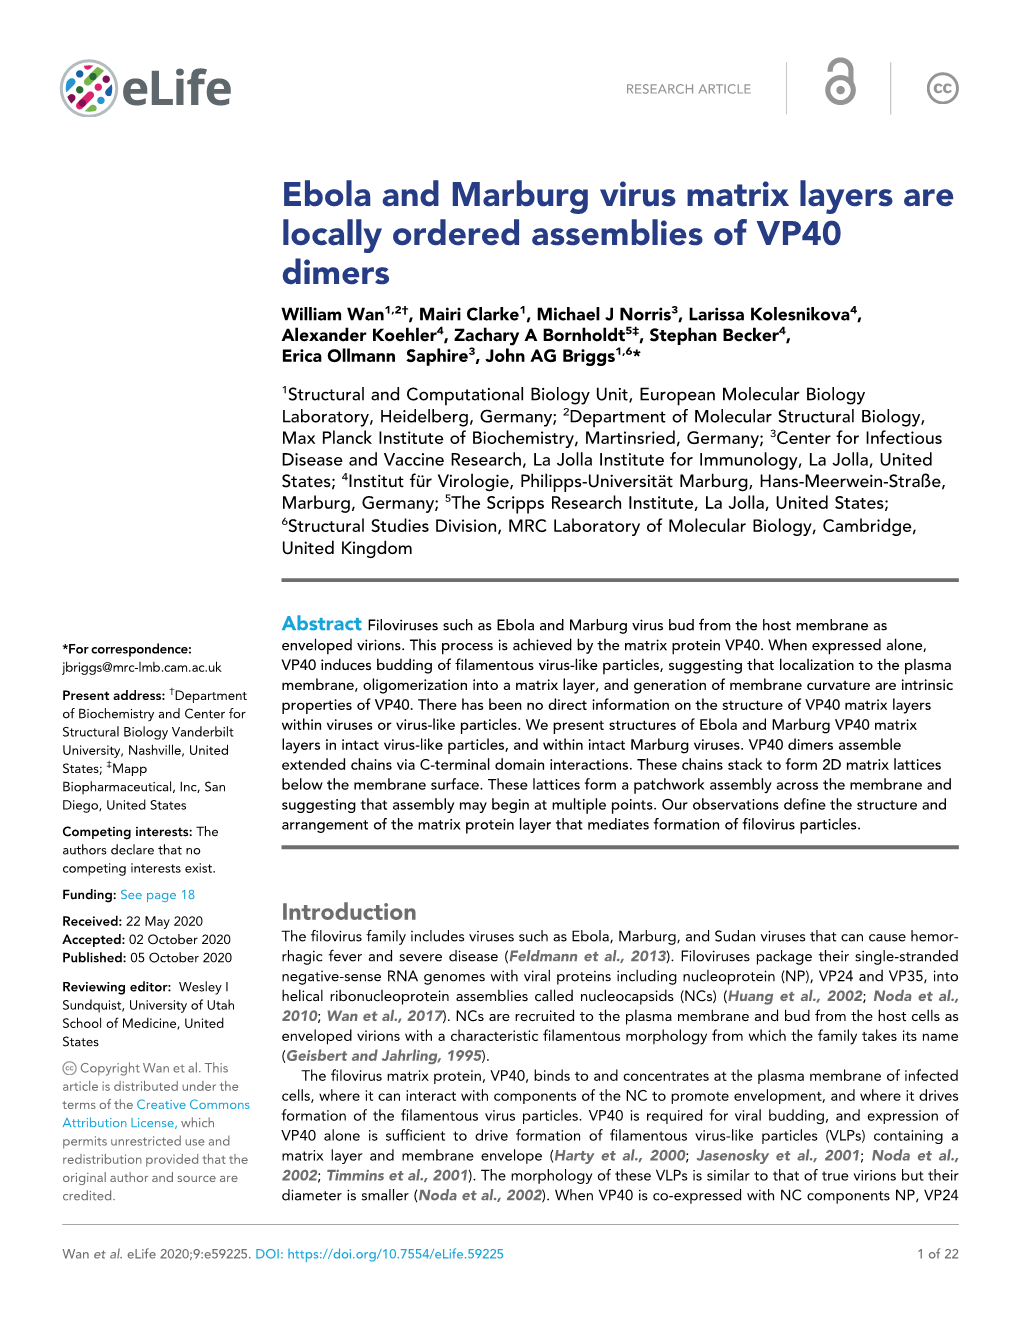 Ebola and Marburg Virus Matrix Layers Are Locally Ordered Assemblies Of